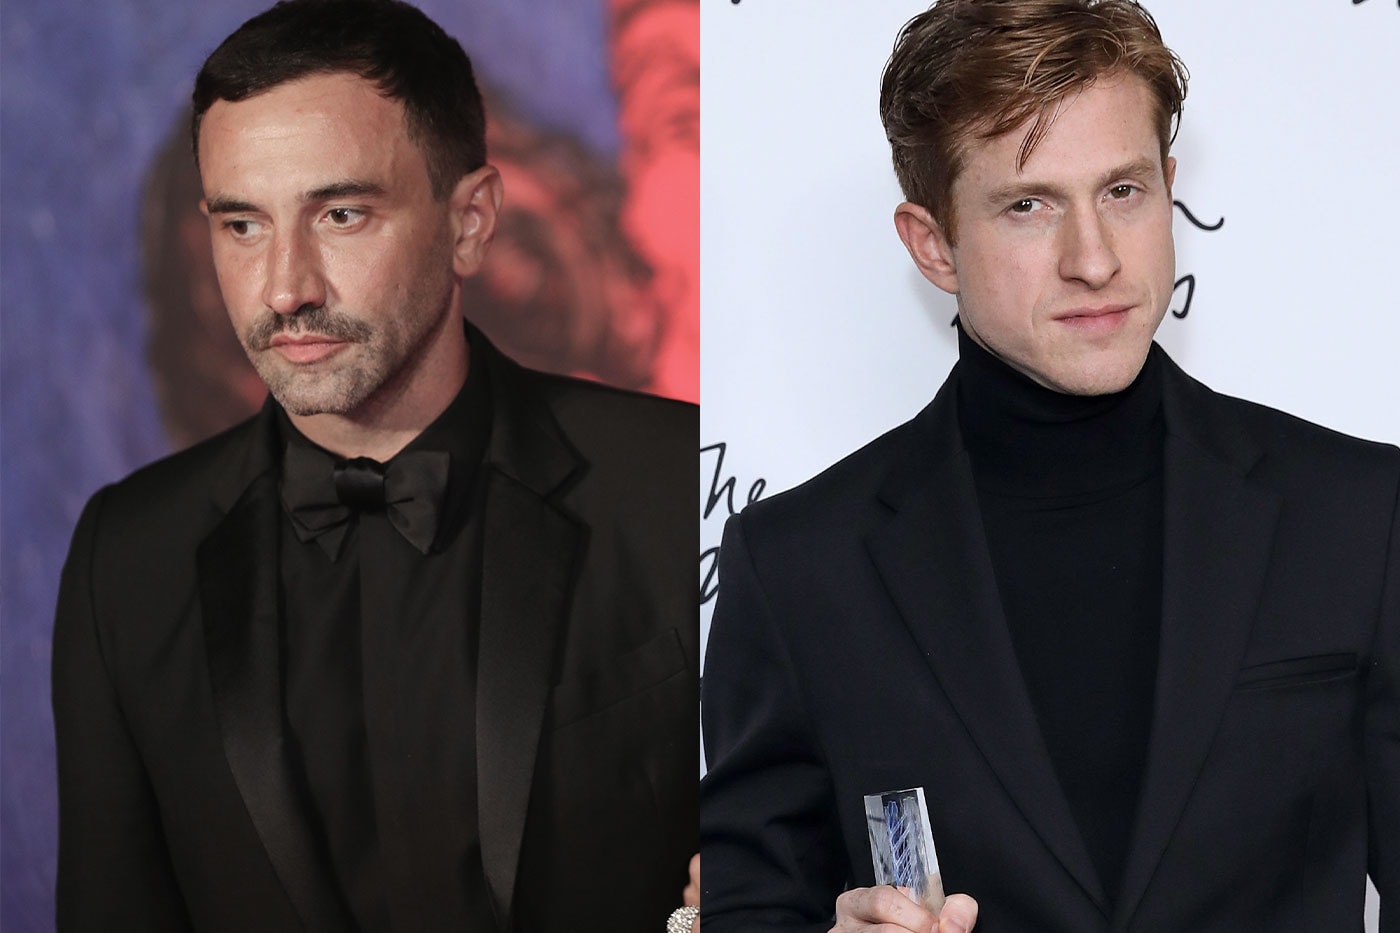 Is Burberry Ready To Move On From Riccardo Tisci With Daniel Lee? Rumors london british bottega venetta givenchy